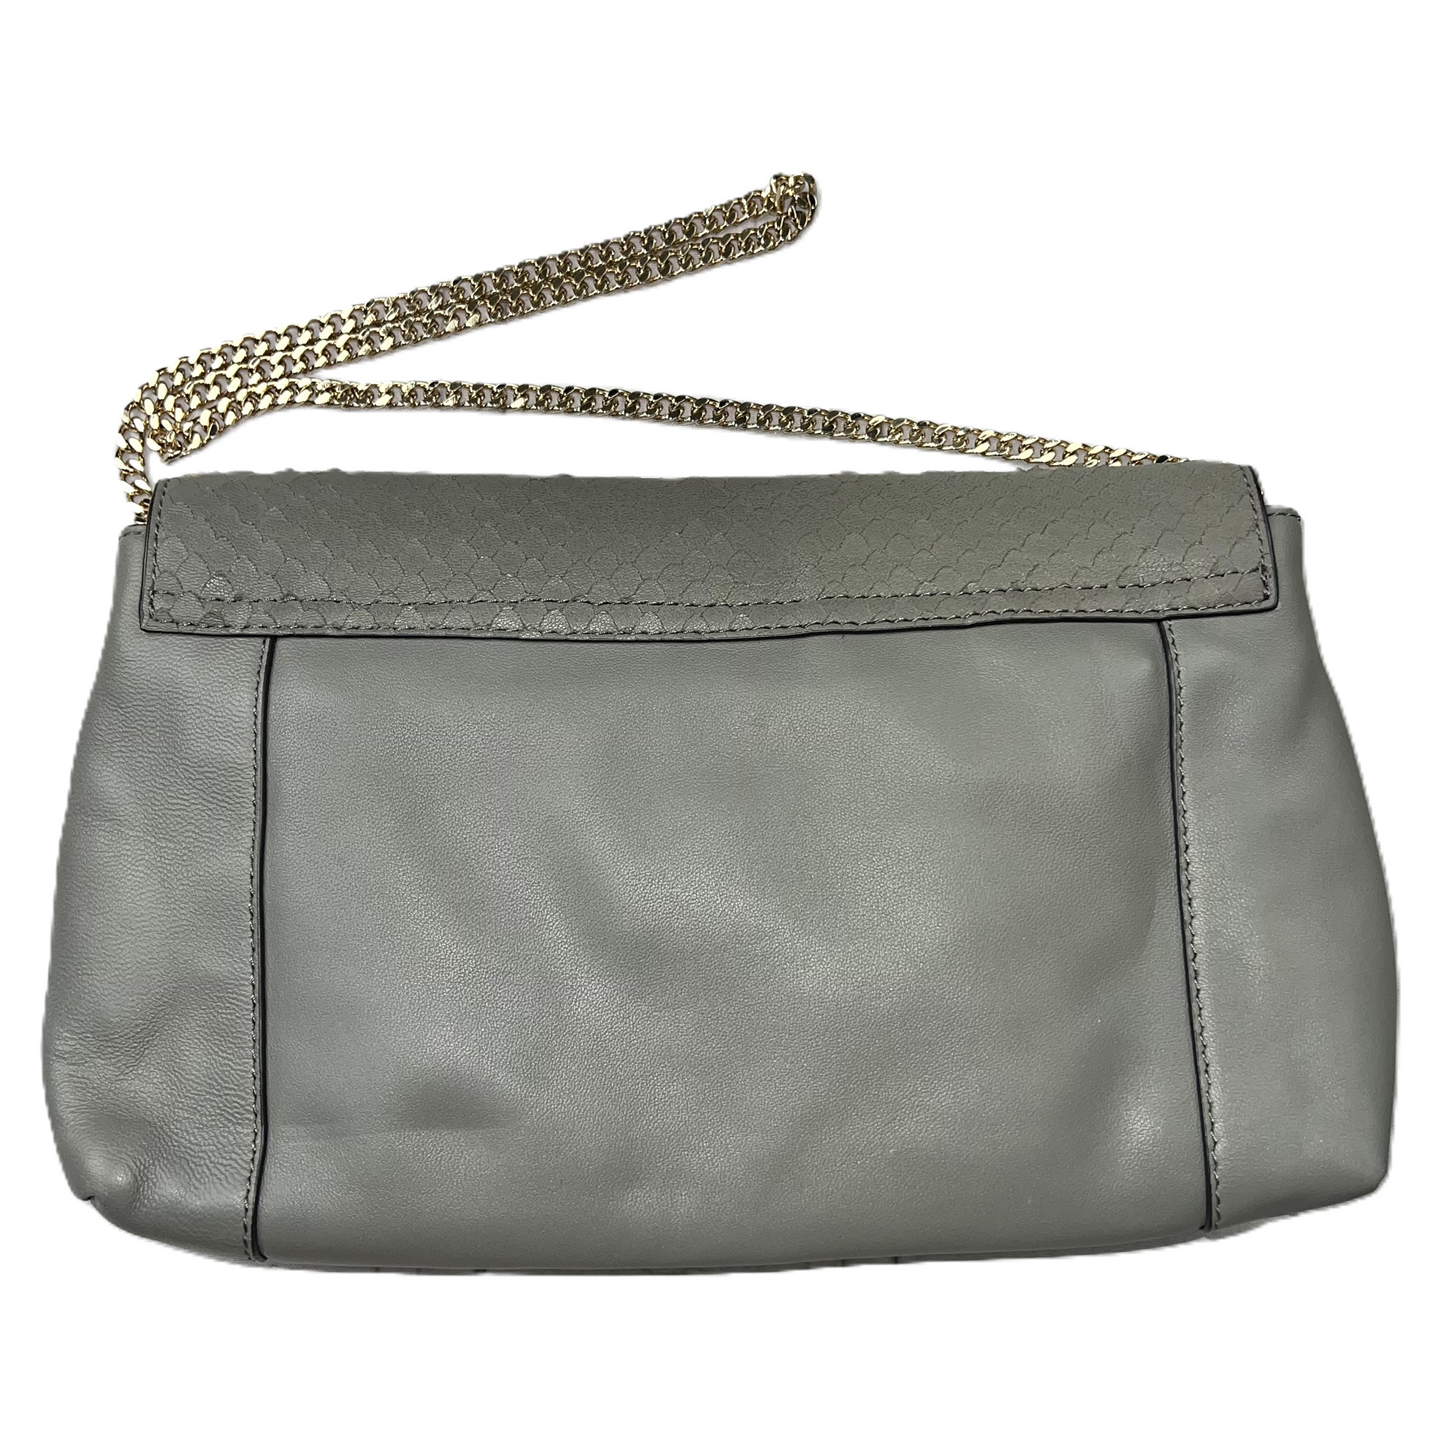 Clutch Designer By Vince Camuto, Size: Large